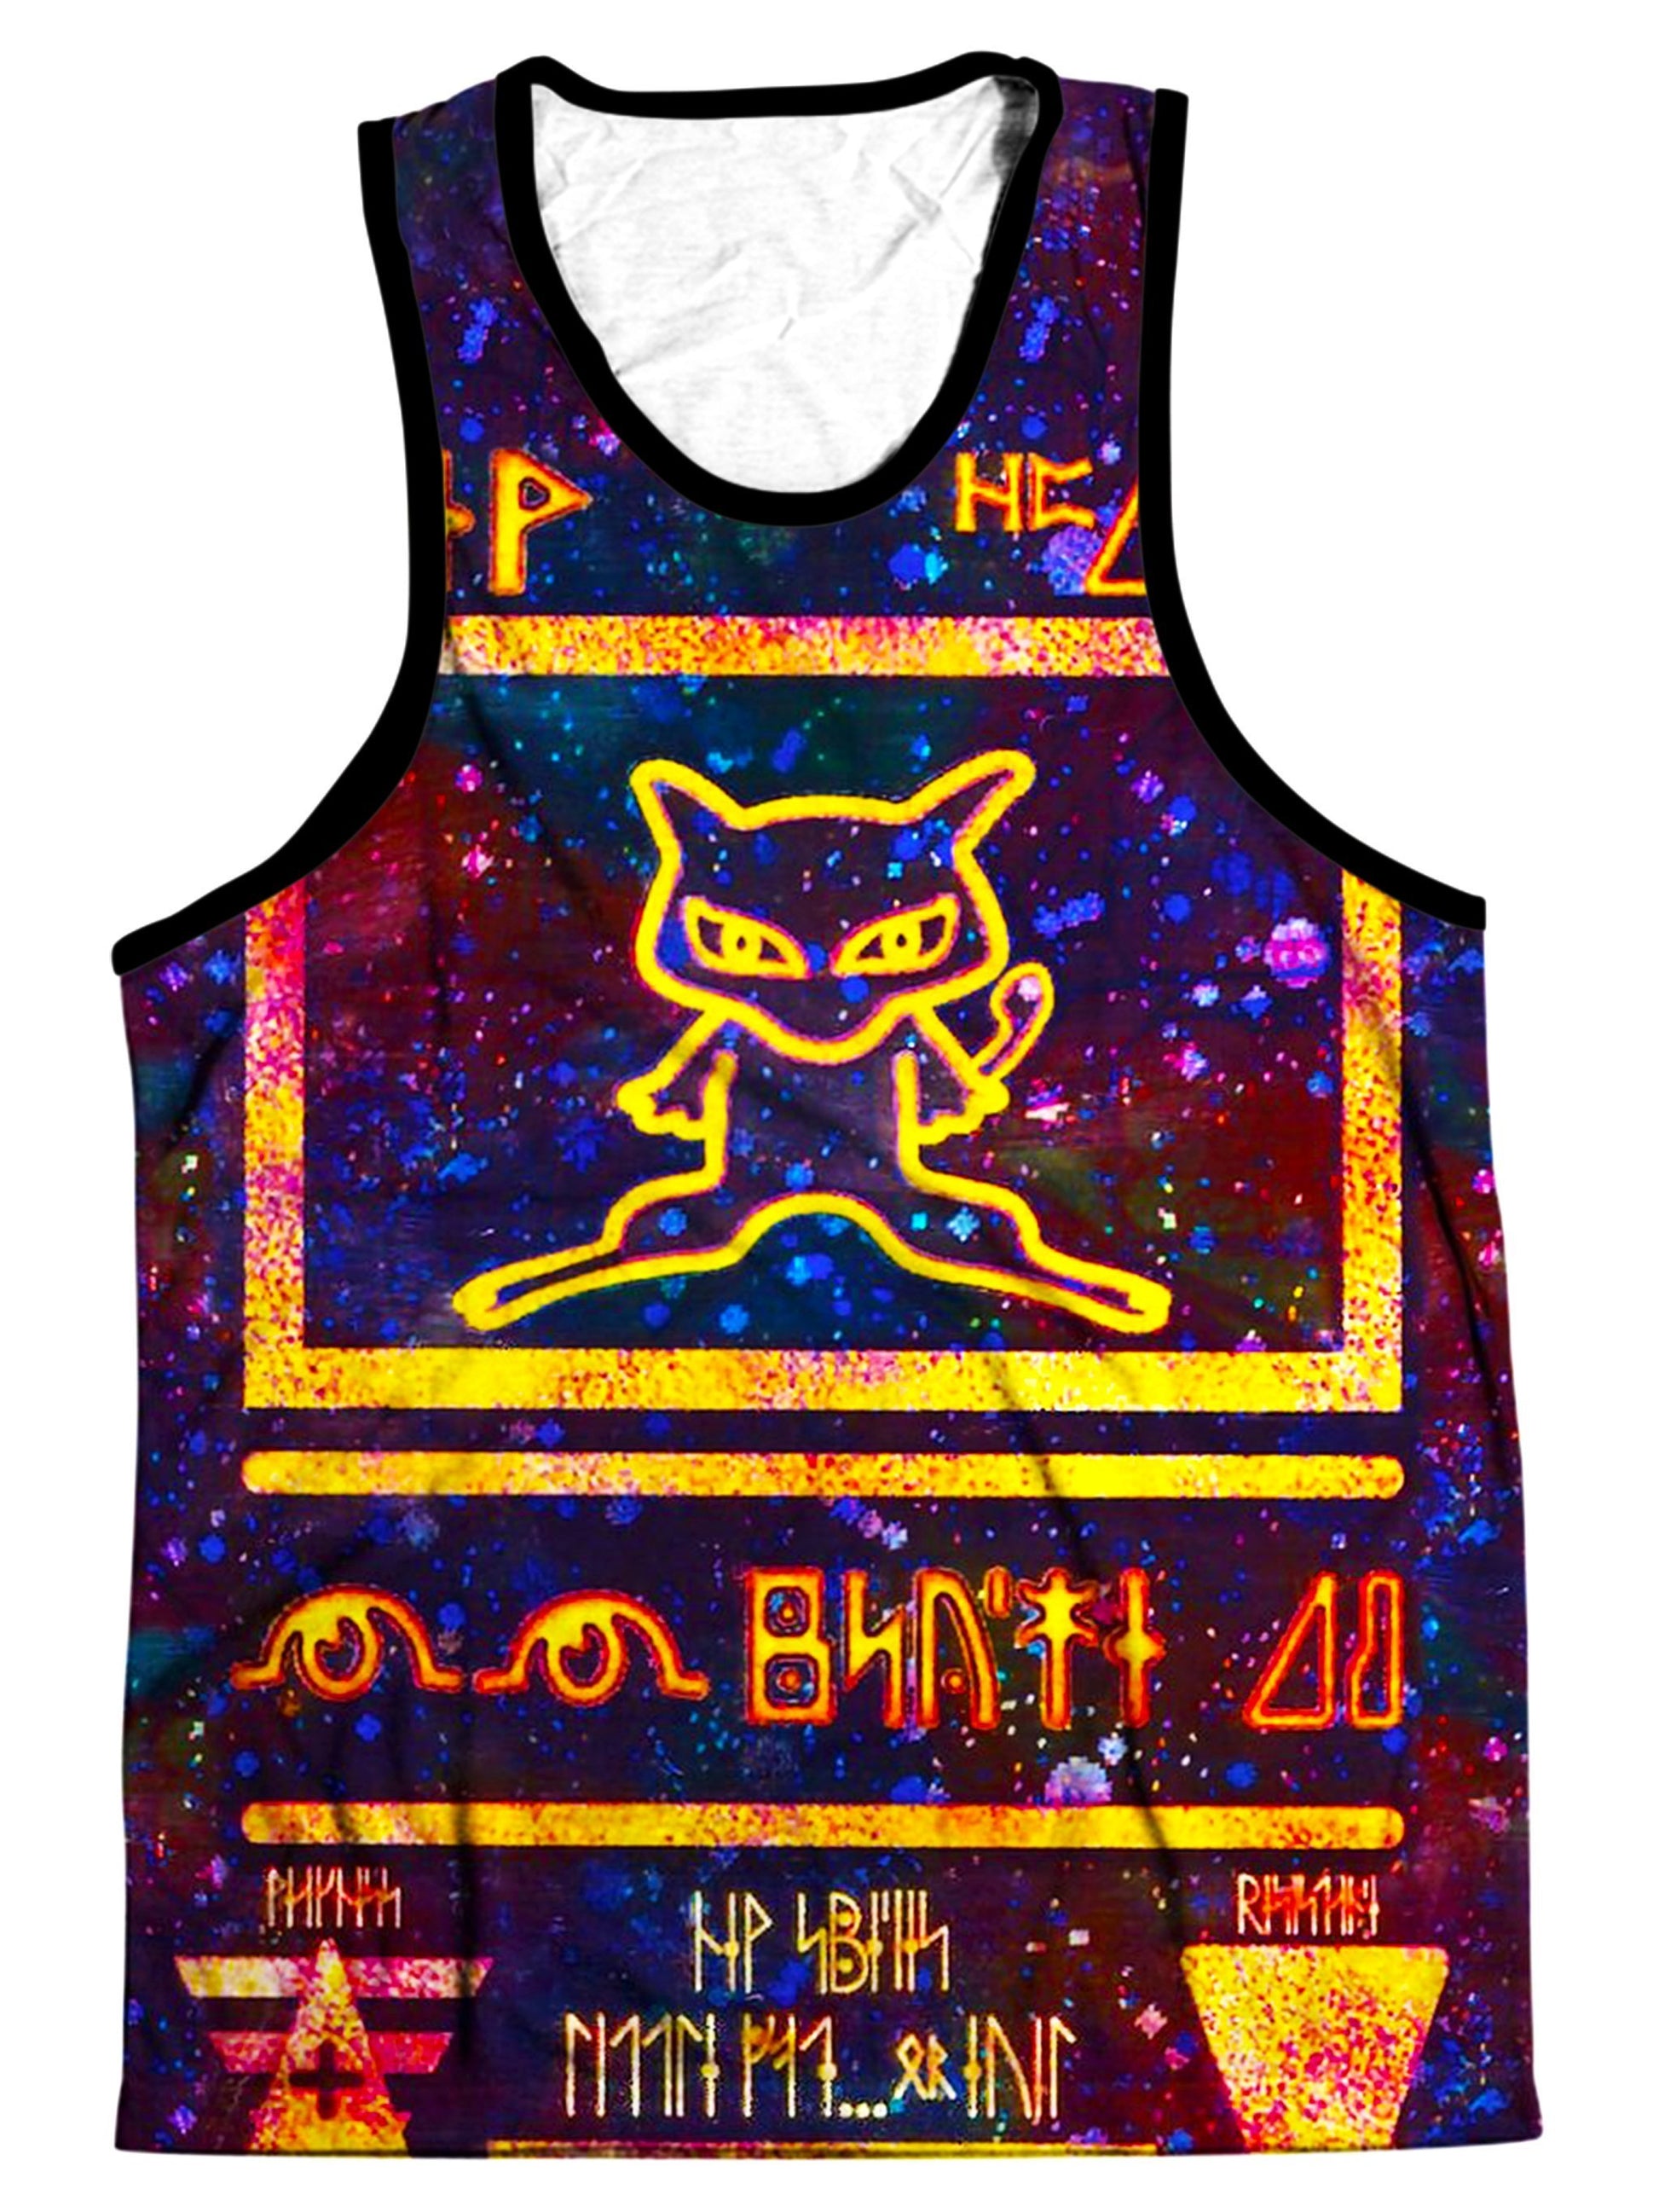 Predator Vision Men's Tank Top by on Cue Apparel in Black - X-Small - Rave Gear - iEDM